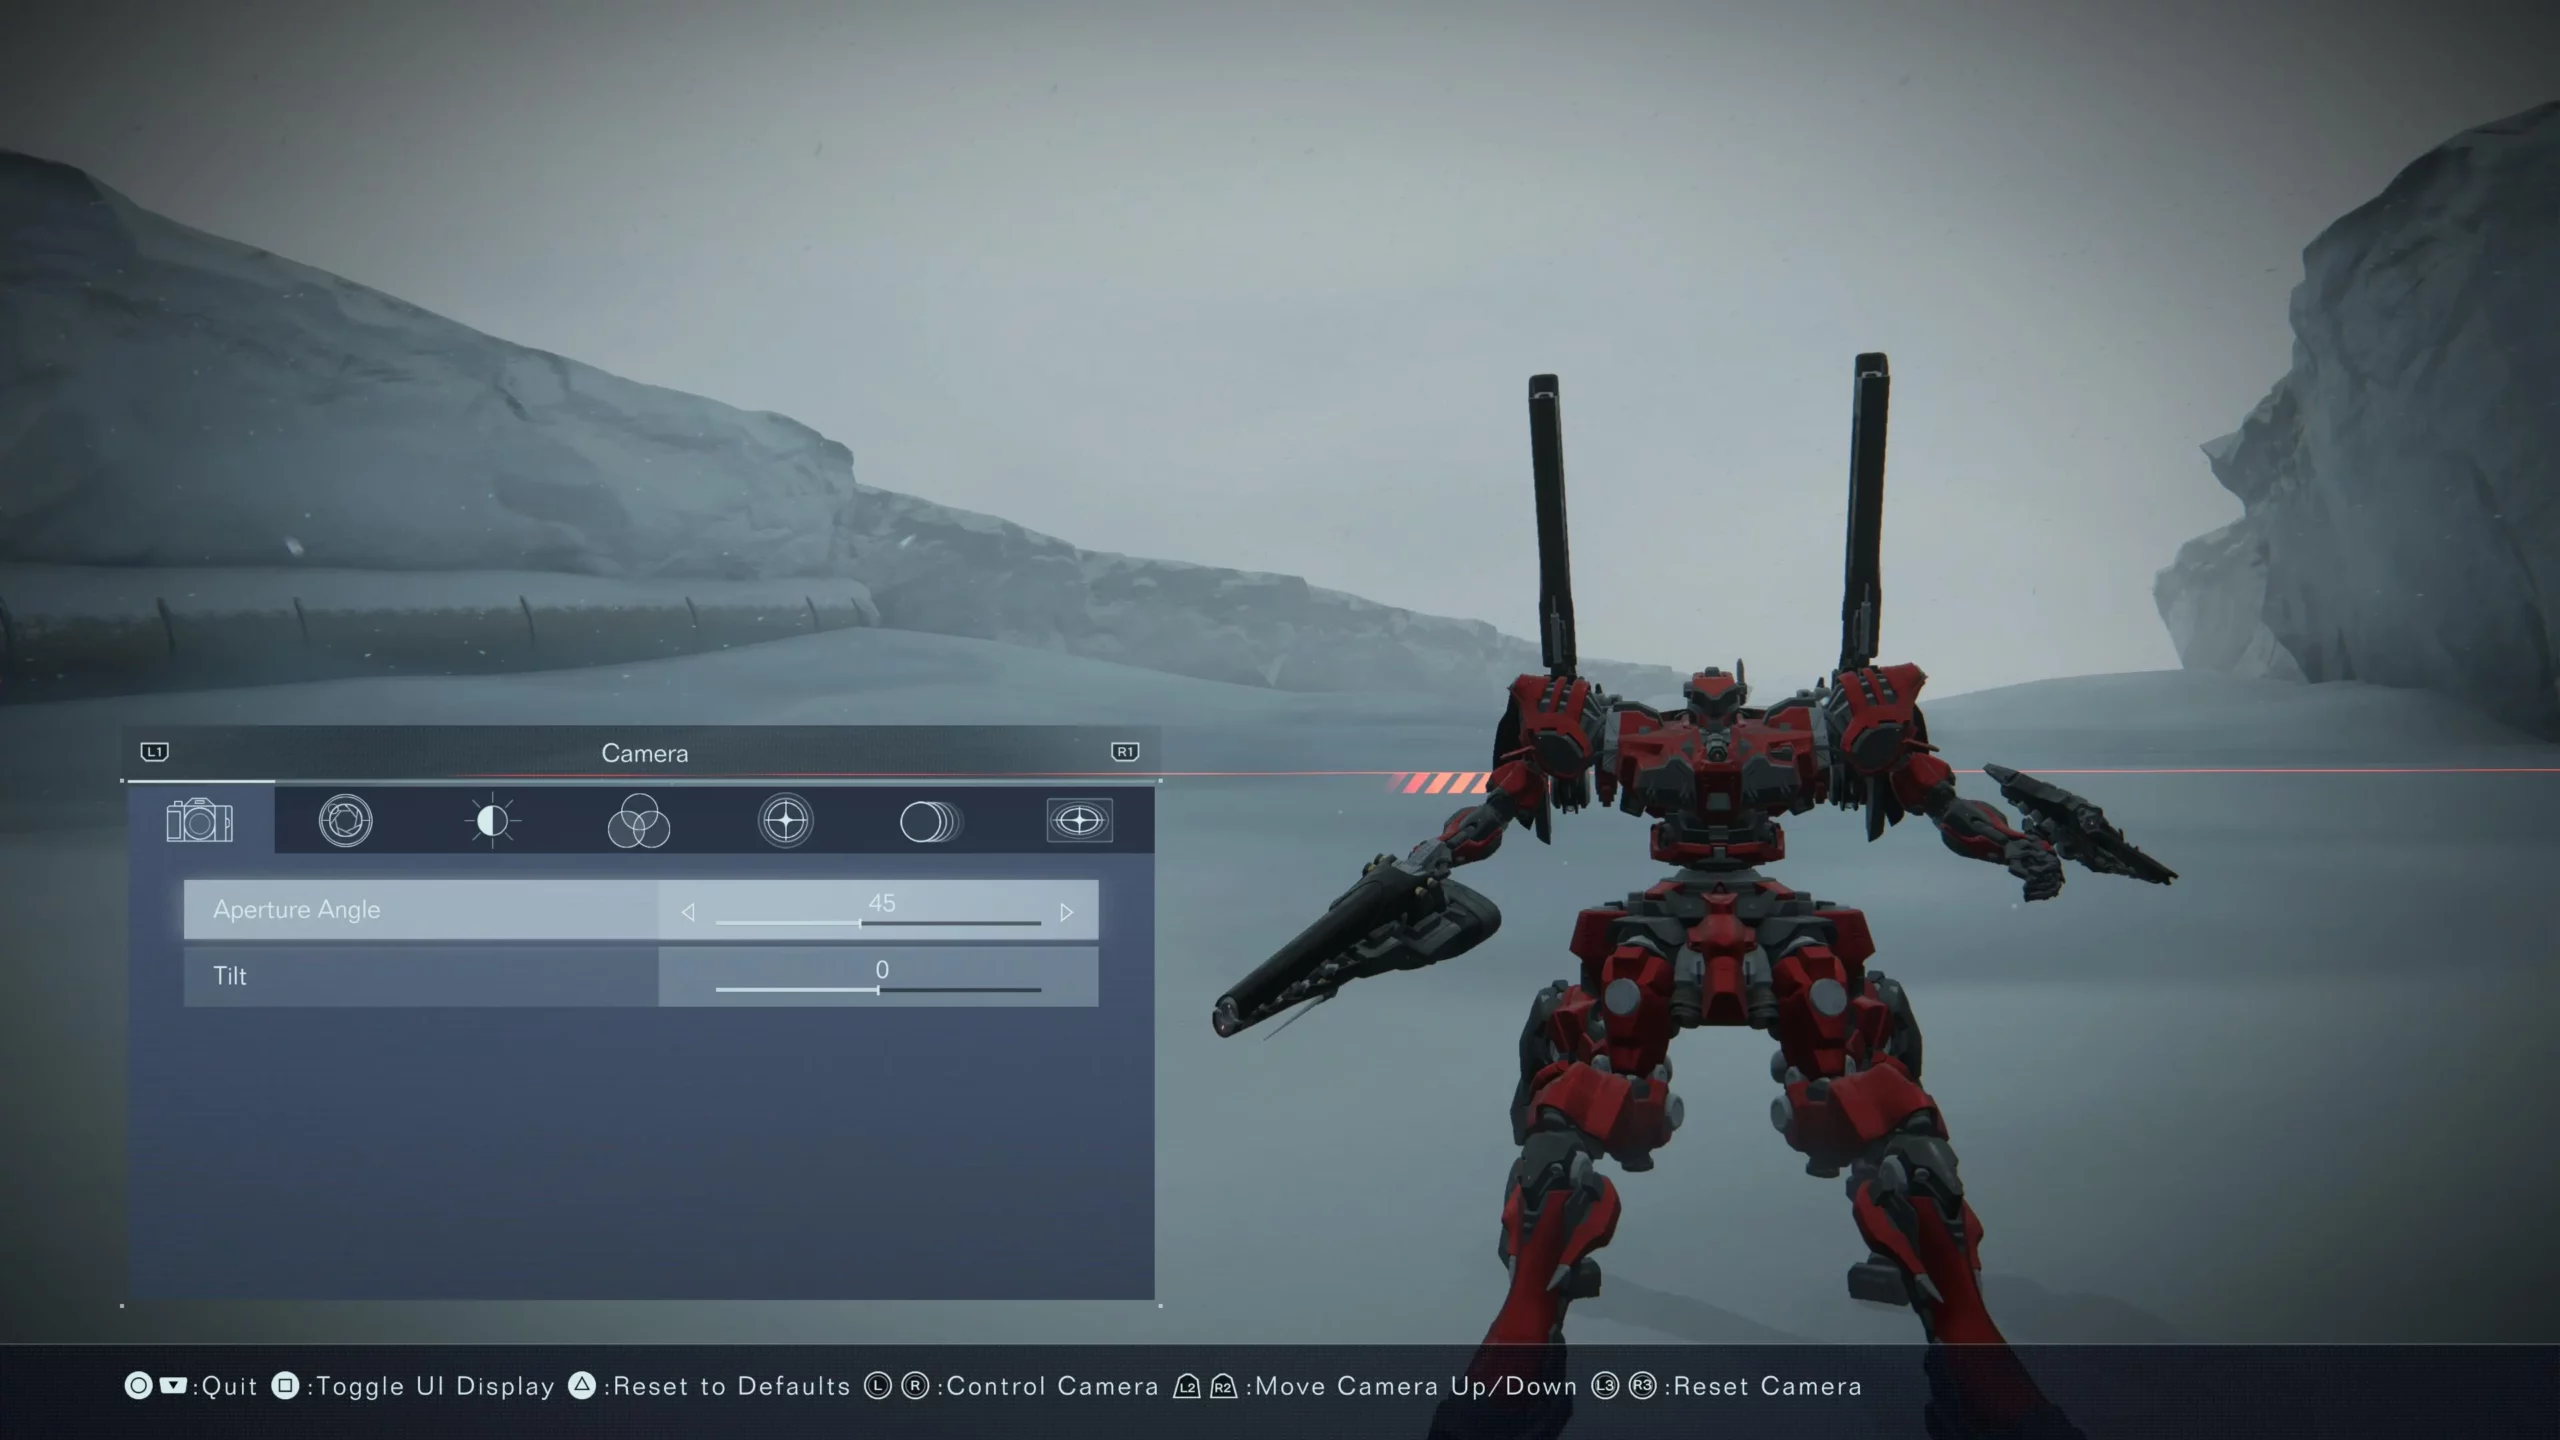 How To Use Photo Mode In Armored Core 6